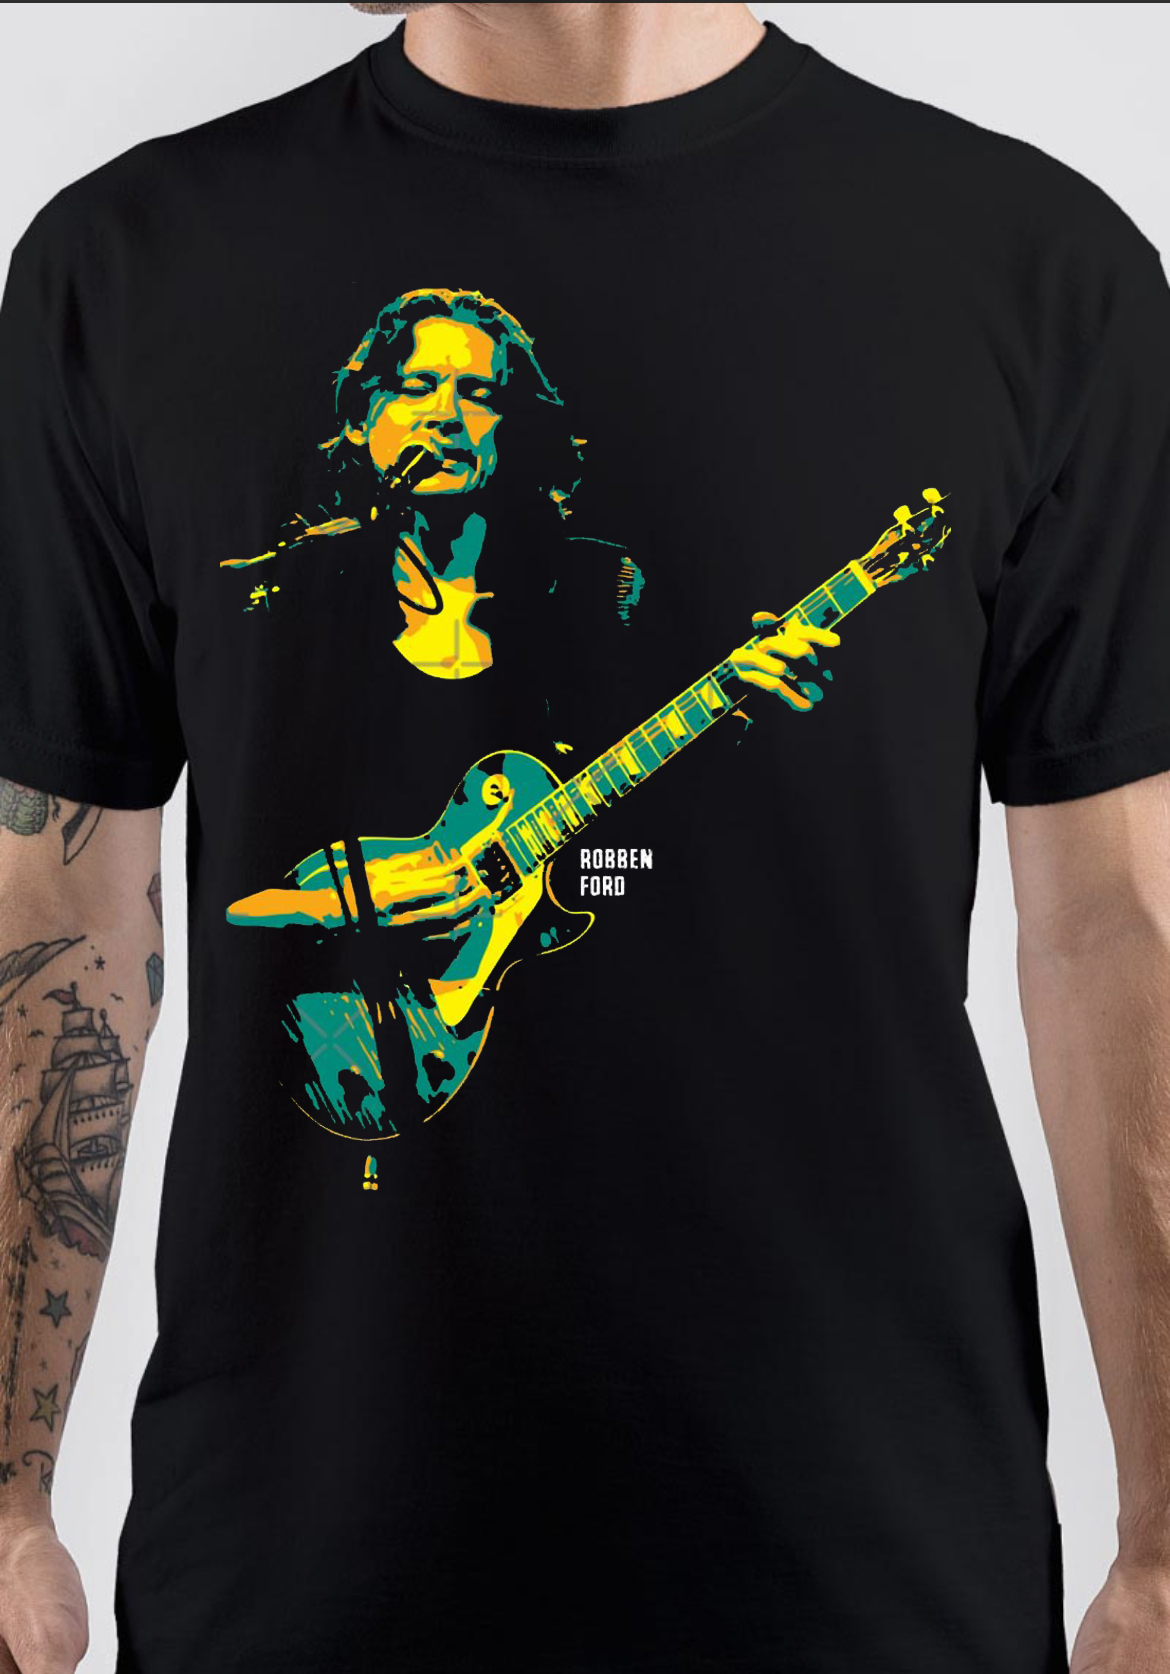 Robben Ford T-Shirt And Merchandise